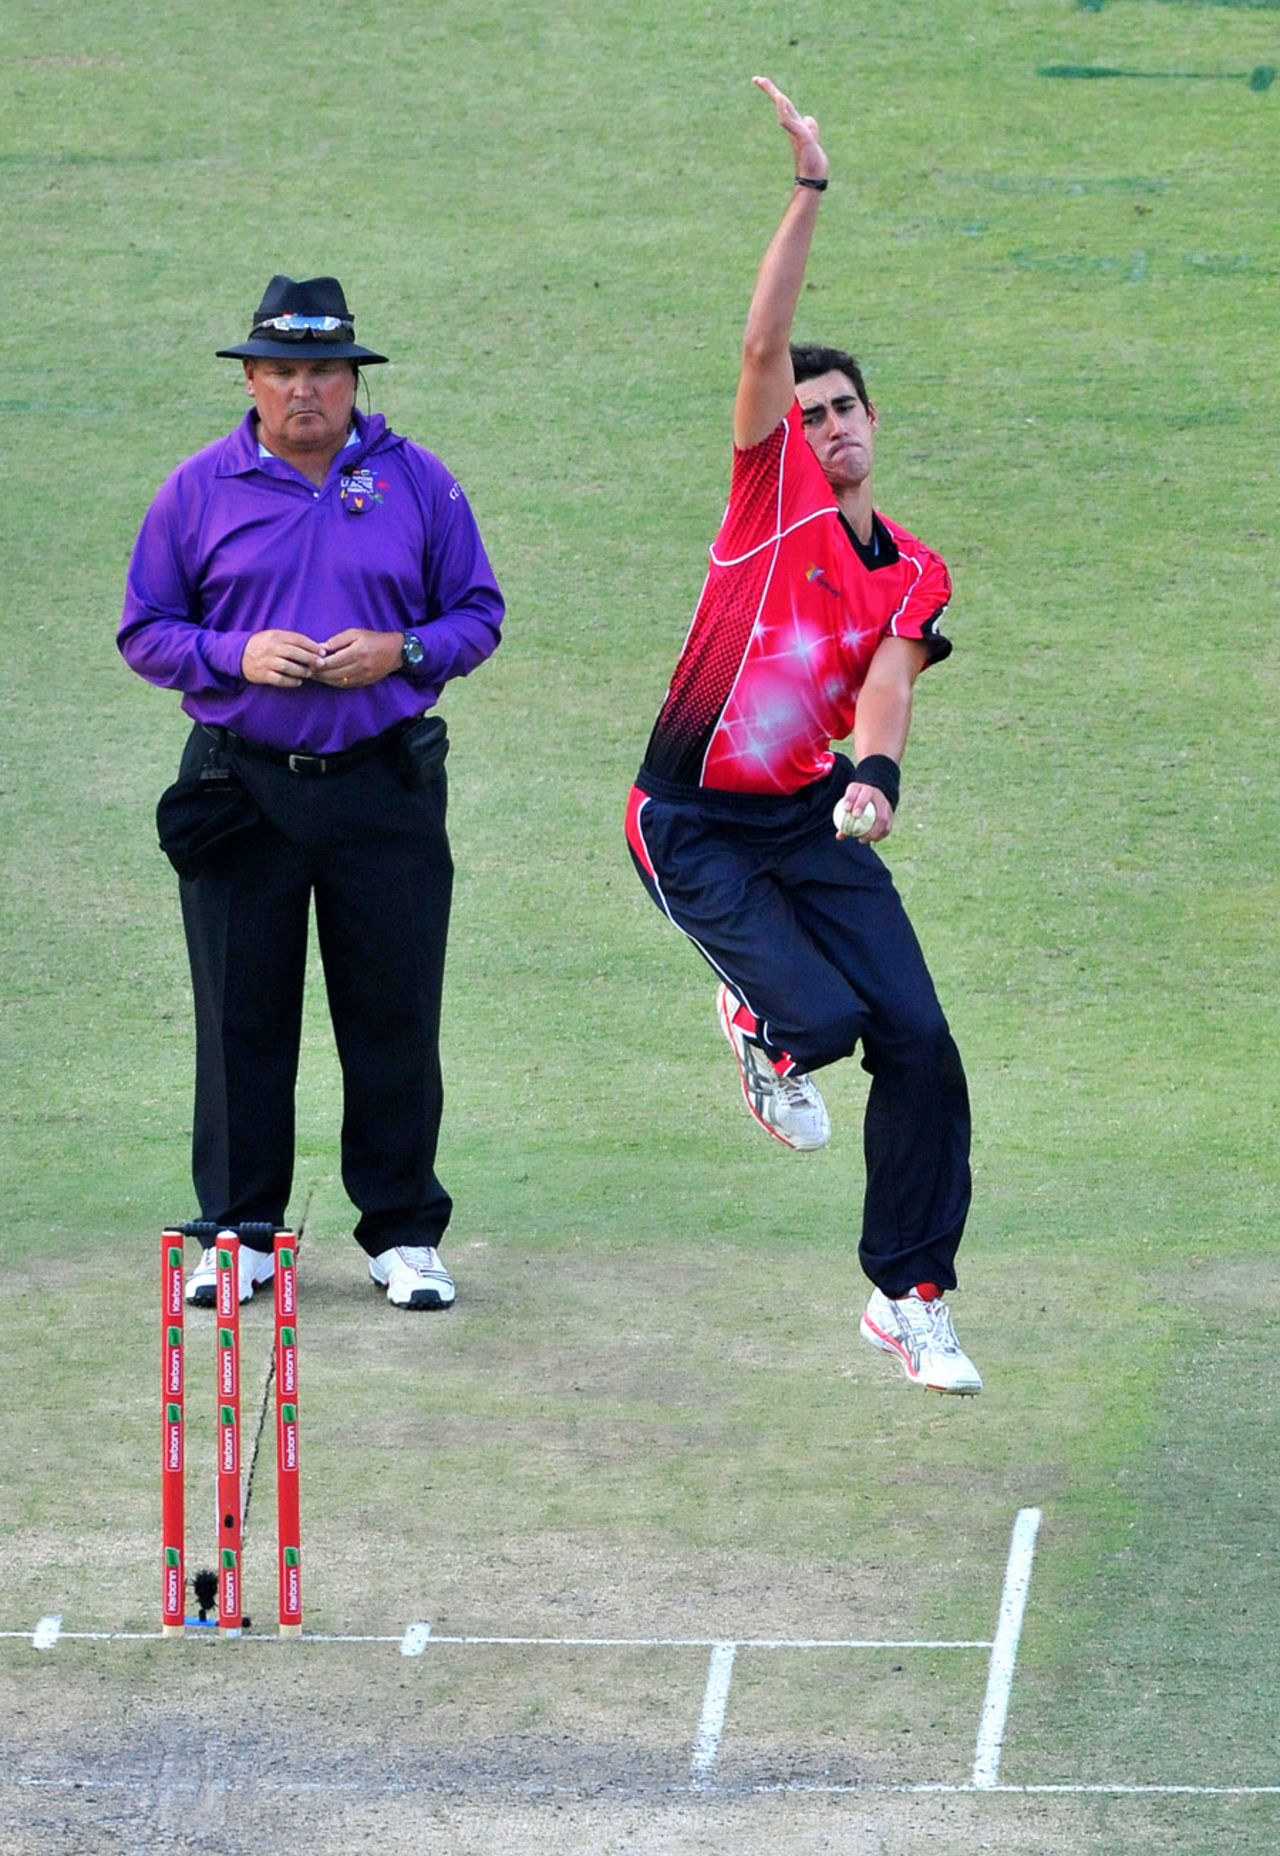 Mitchell Starc delivers the ball, Titans v Sydney Sixers, 2nd semi-final, Champions League T20, Centurion, October 26, 2012